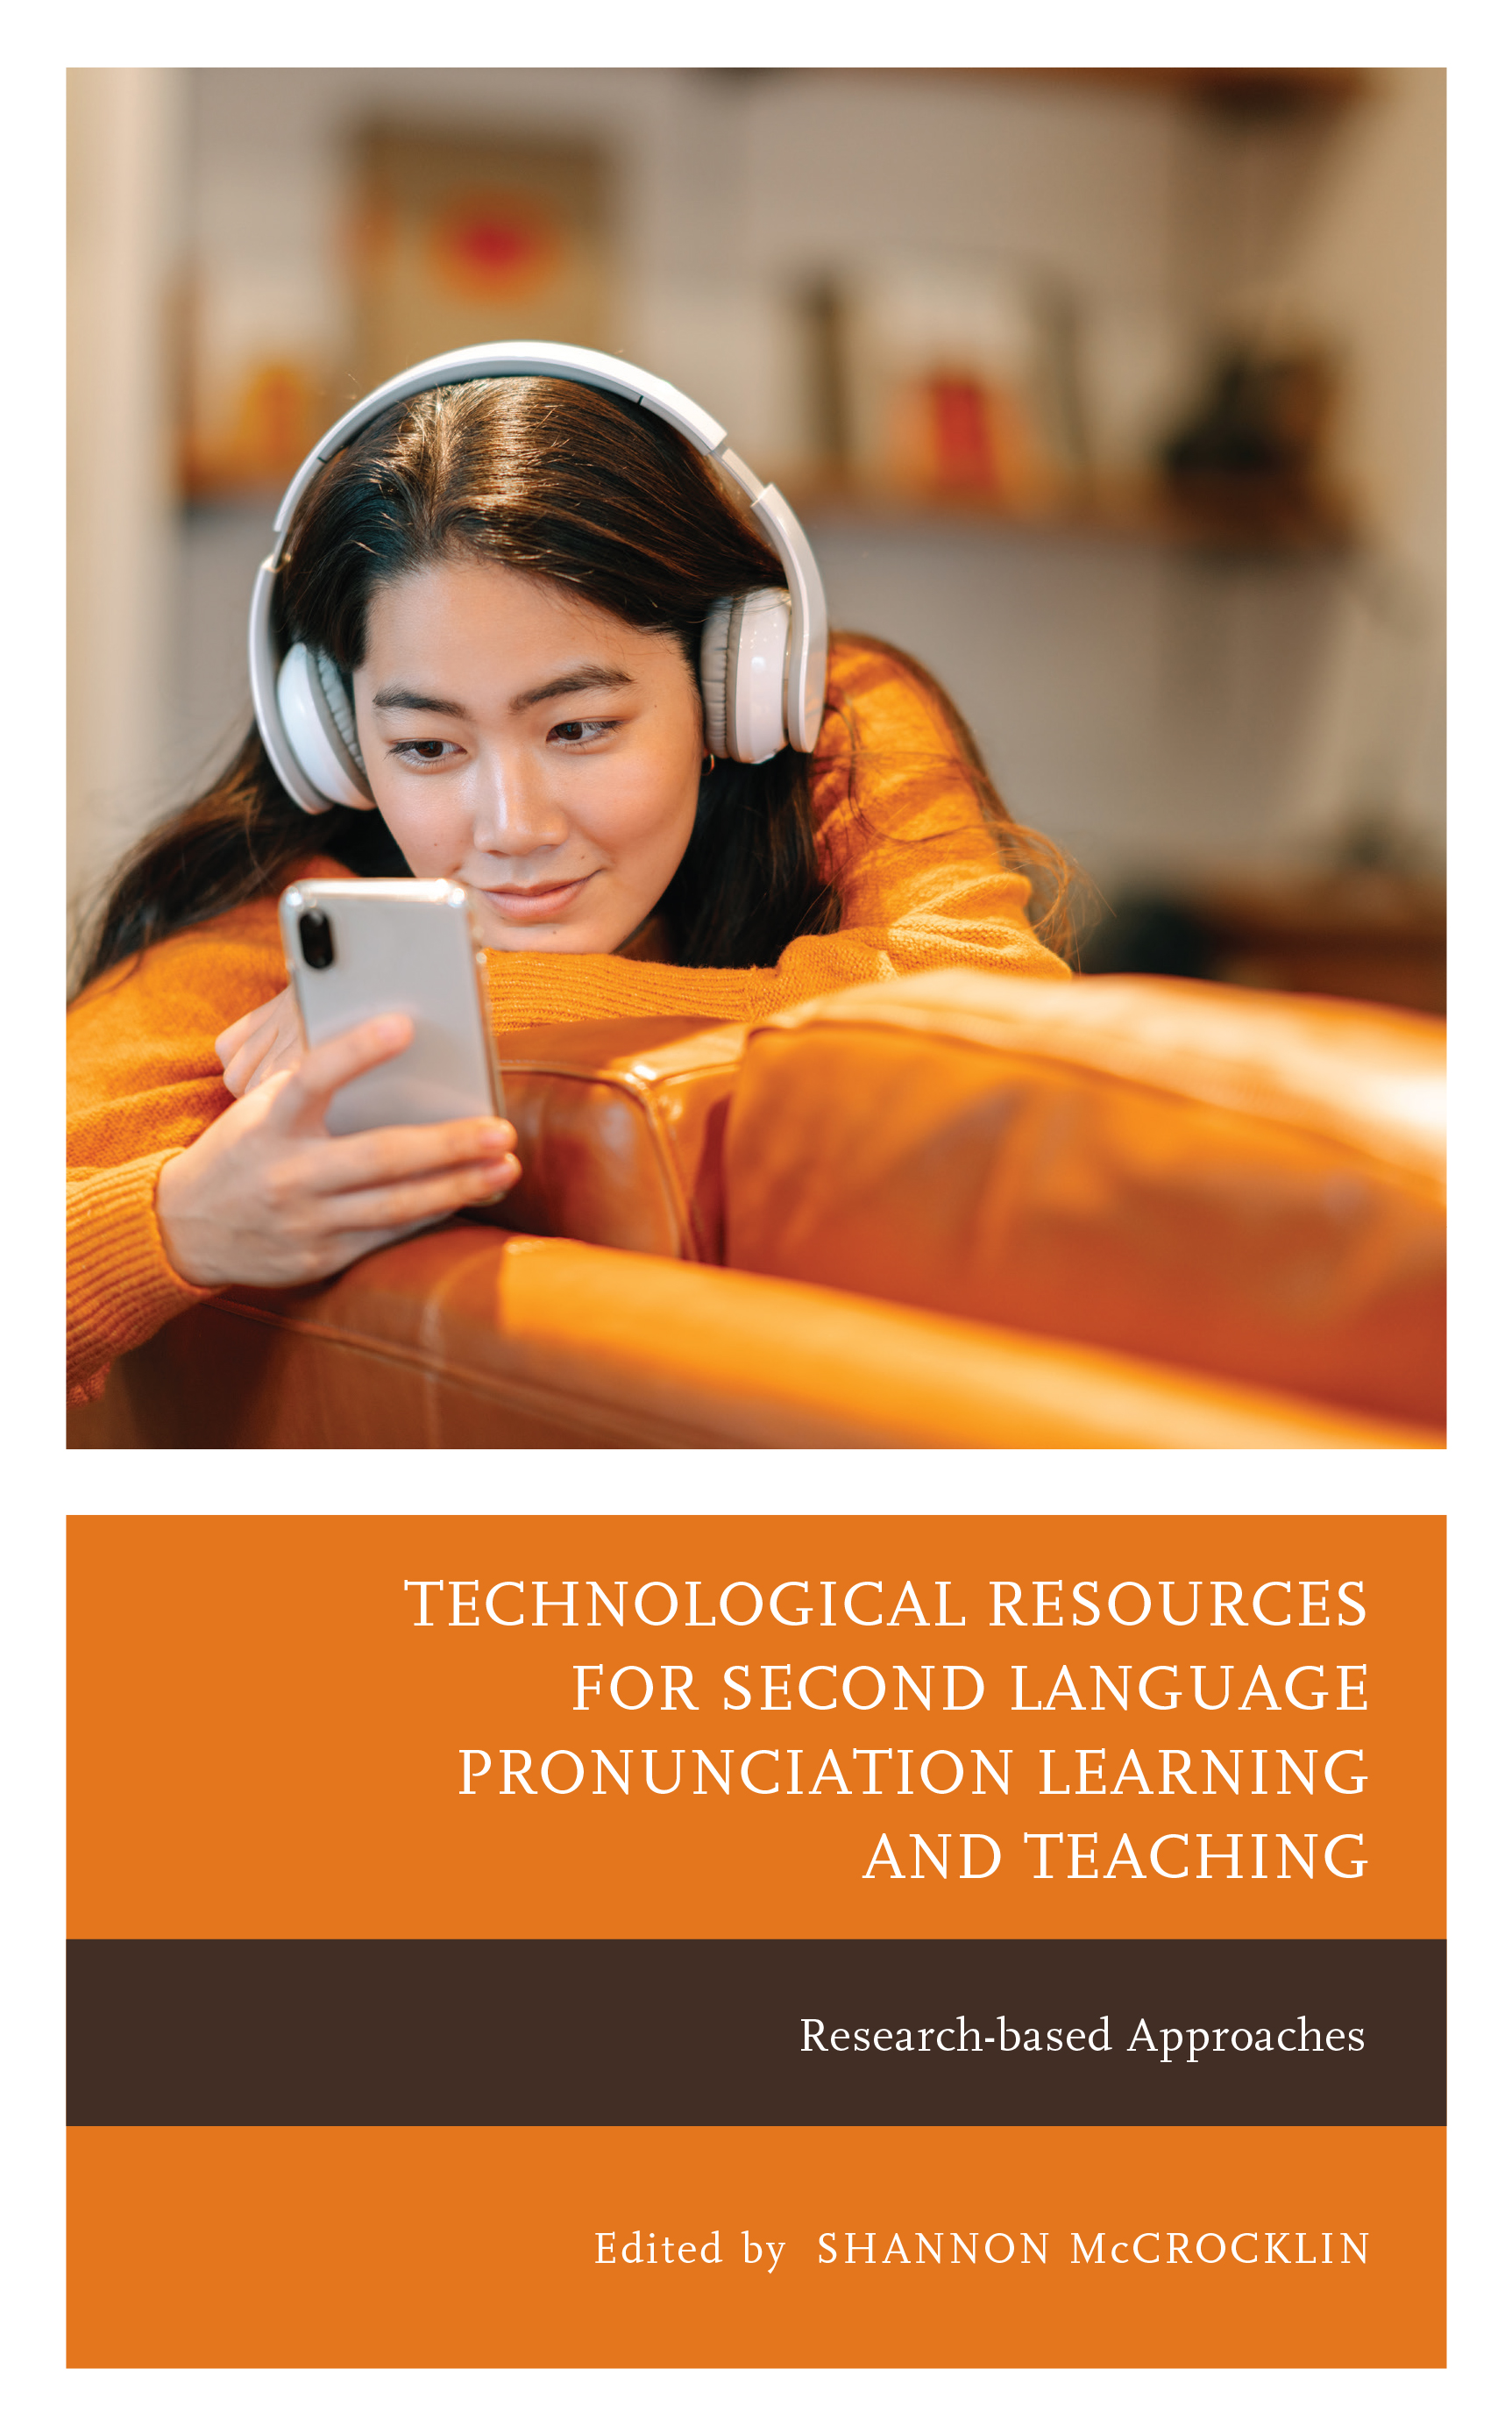 Technological Resources for Second Language Pronunciation Learning and Teaching: Research-based Approaches